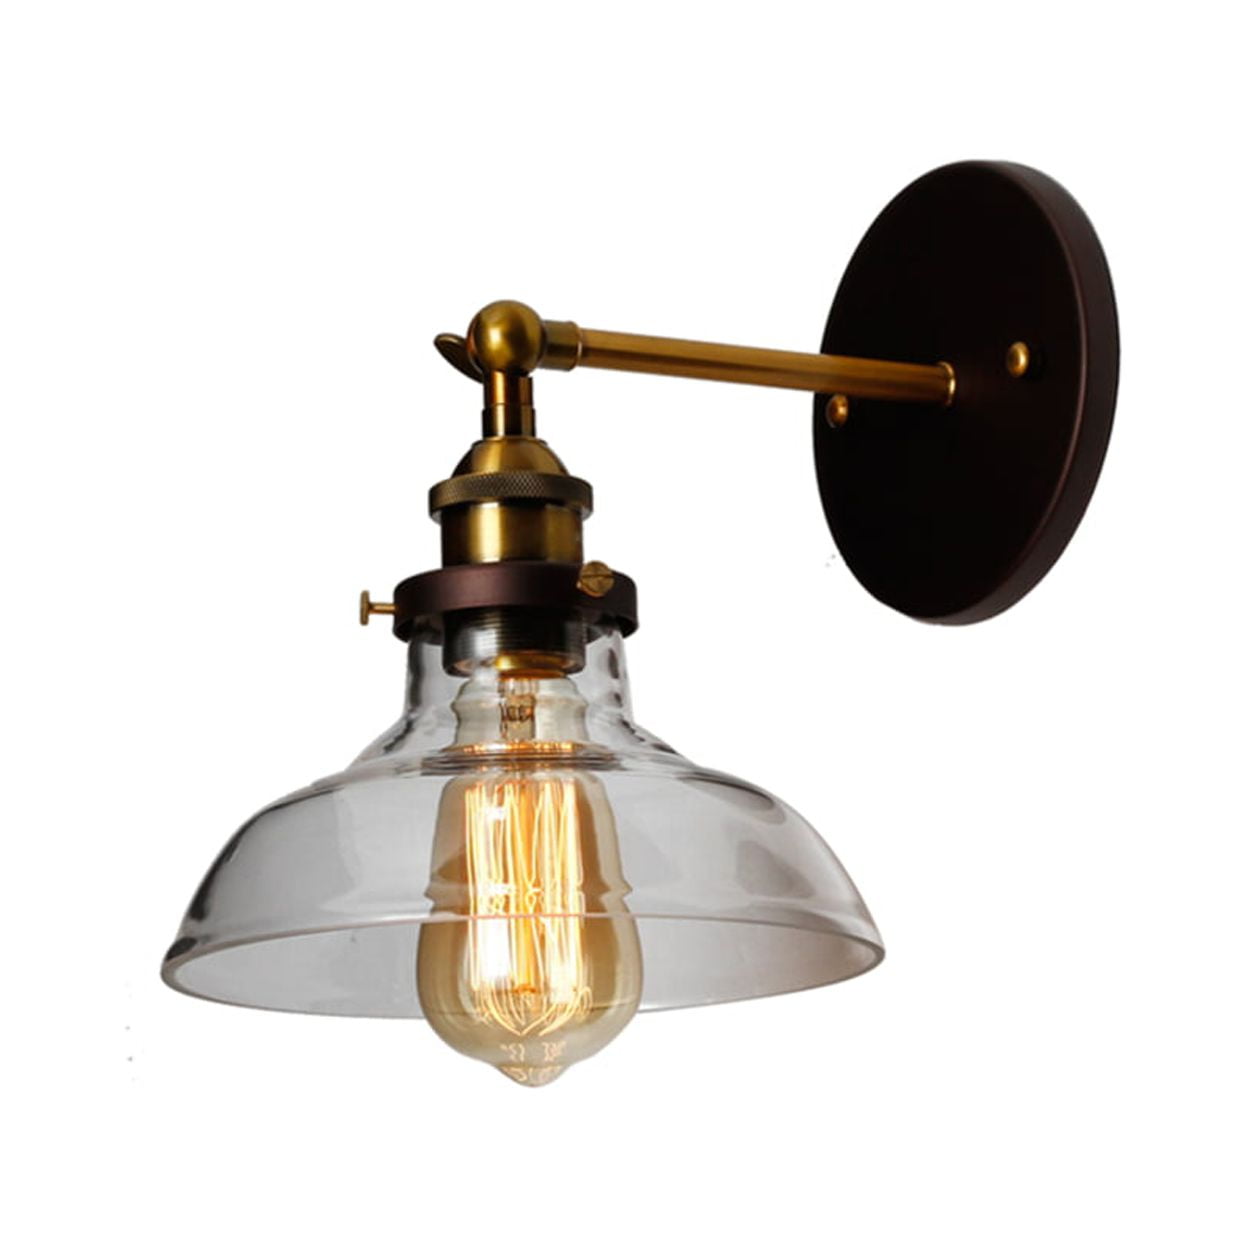 Picture of Chloe Lighting CH6D707RB08-WS1 Braxton Industrial 1 Light Oil Rubbed Bronze Wall Sconce - 8 in.